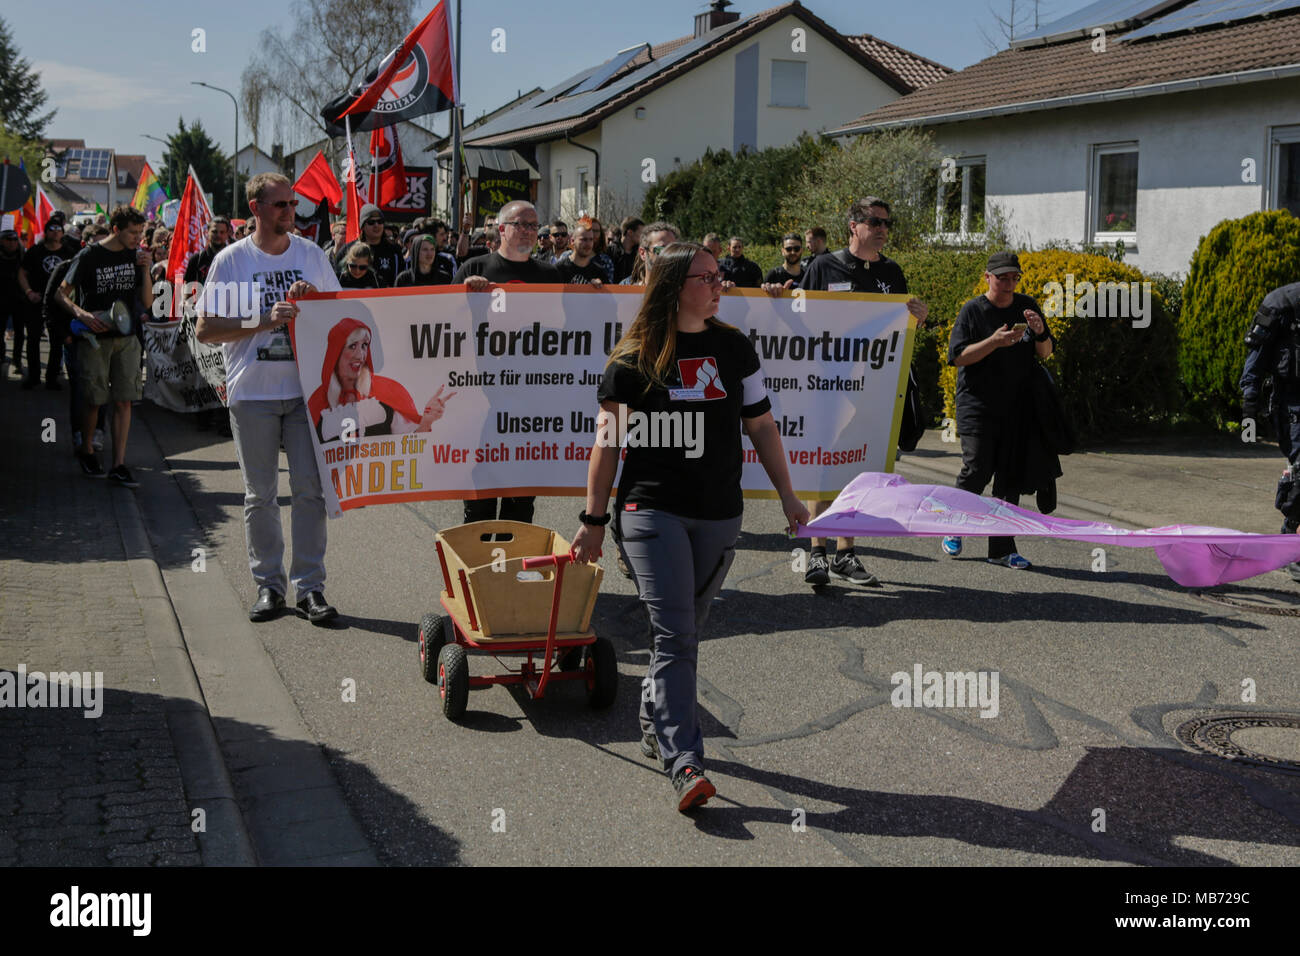 Kandel, Germany. 7th April 2018. Protesters march with flags and banners through Kandel. Around 300 anti-fascists from different political parties and organisations marched through the city of Kandel, to show their opposition to the march by the right-wing protesters that was taking part at the same time and which used the remembrance of the murder of a girl late last year by an Asylum seeker, as pretext for a right-wing and racist protest. Credit: Michael Debets/Alamy Live News Stock Photo